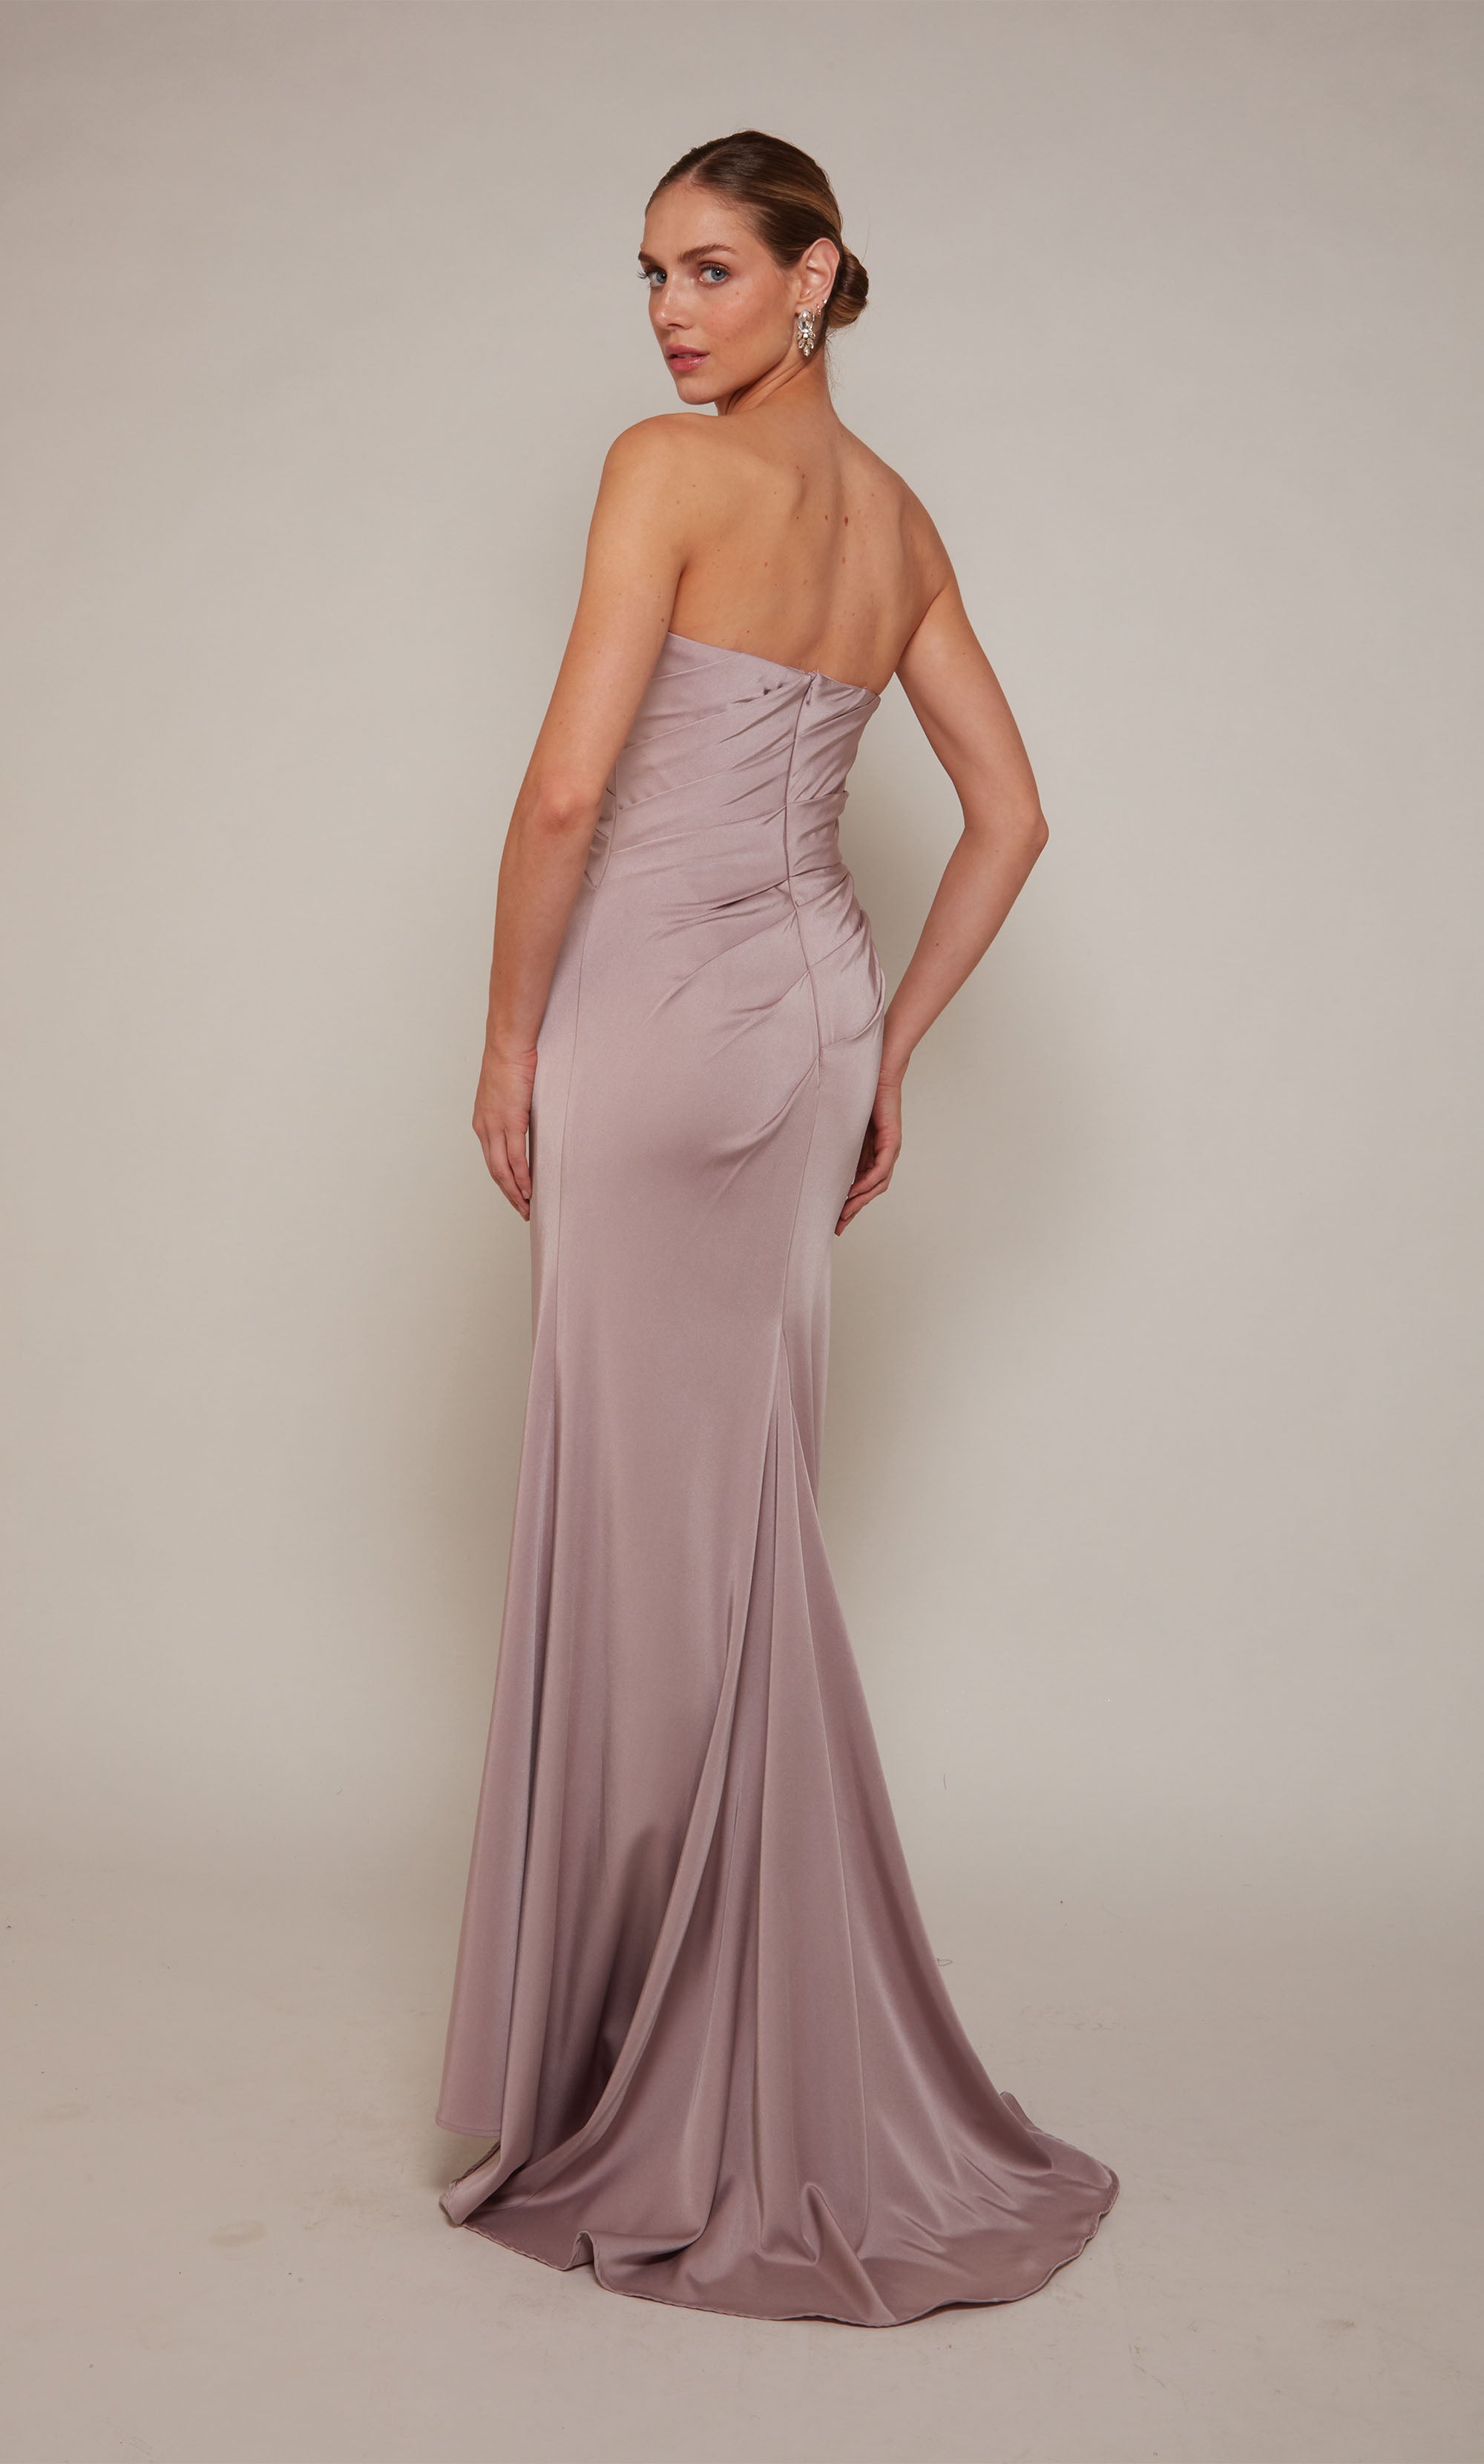 A strapless designer gown highlighting a pleated bodice, a bow at the waistline, and a side slit in the color rosewood.